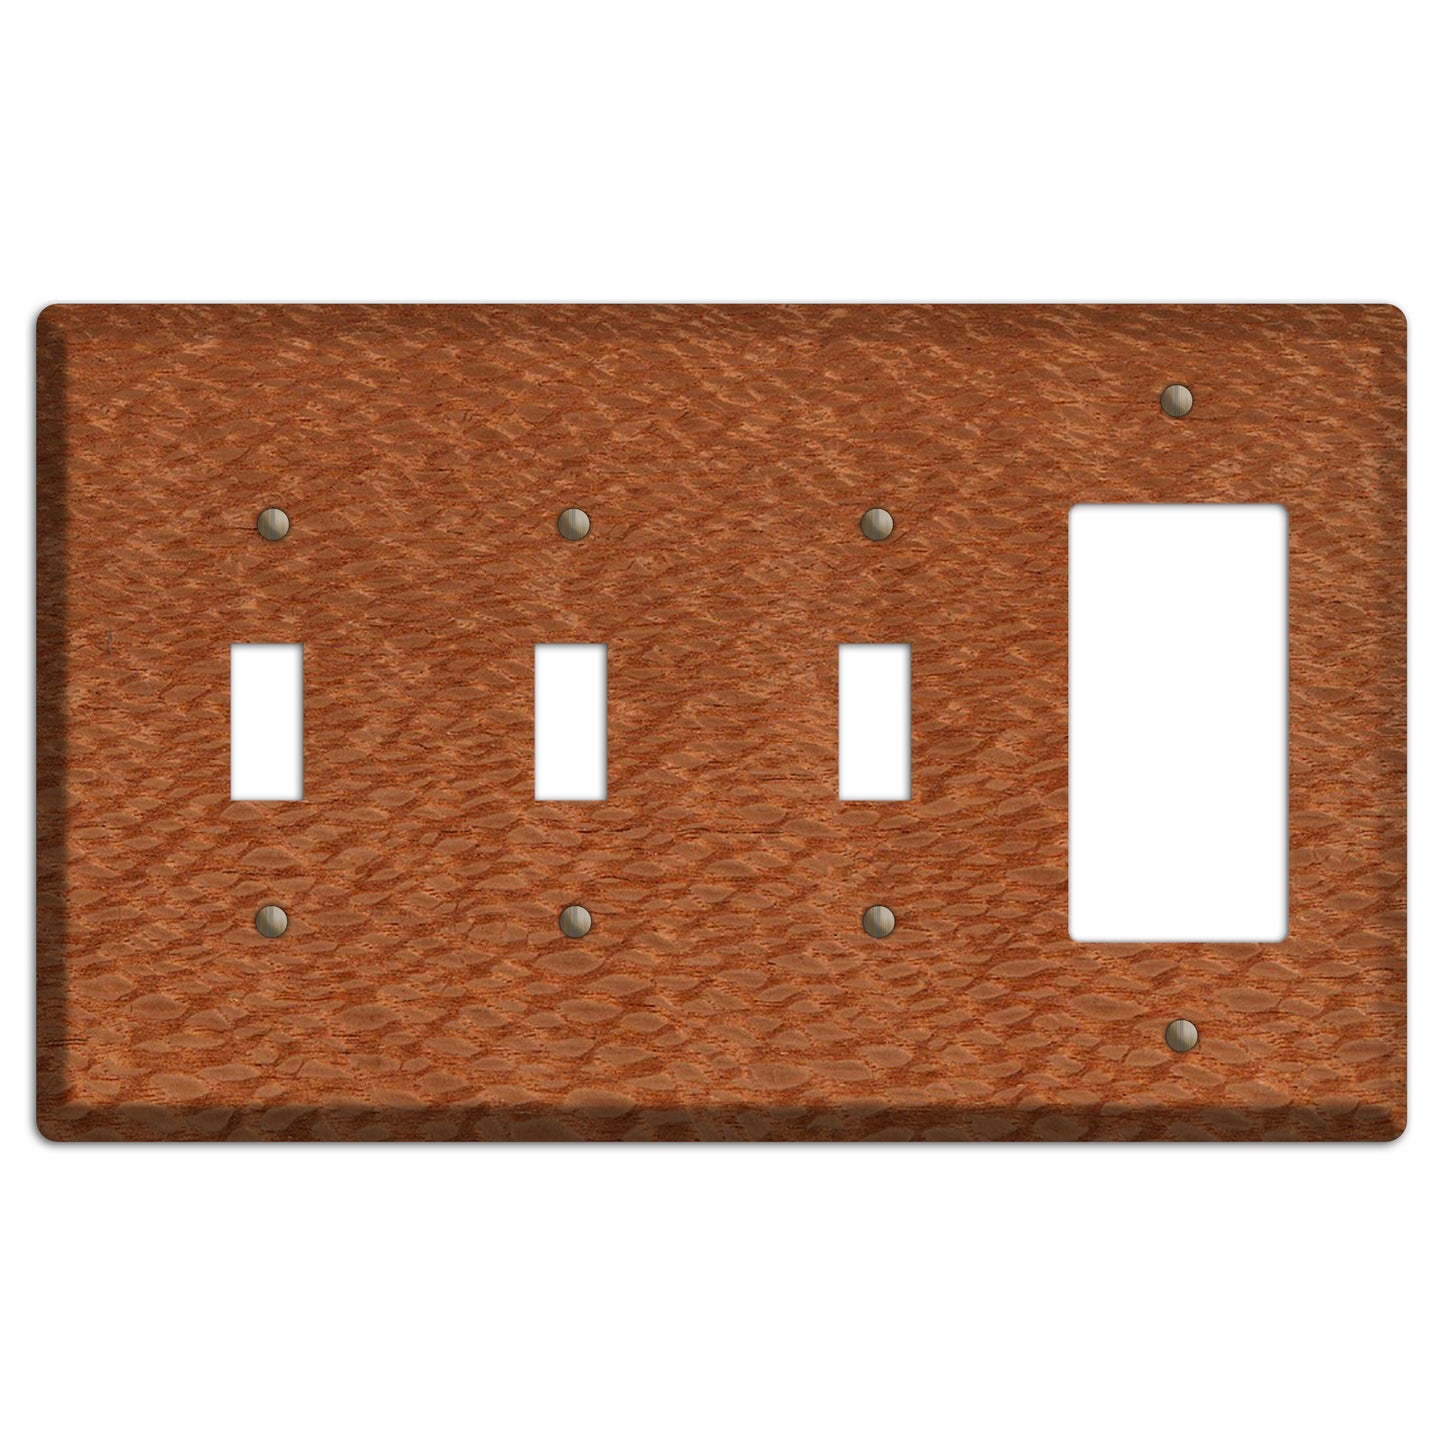 Lacewood Wood 3 Toggle / Rocker Outlet Cover Plate